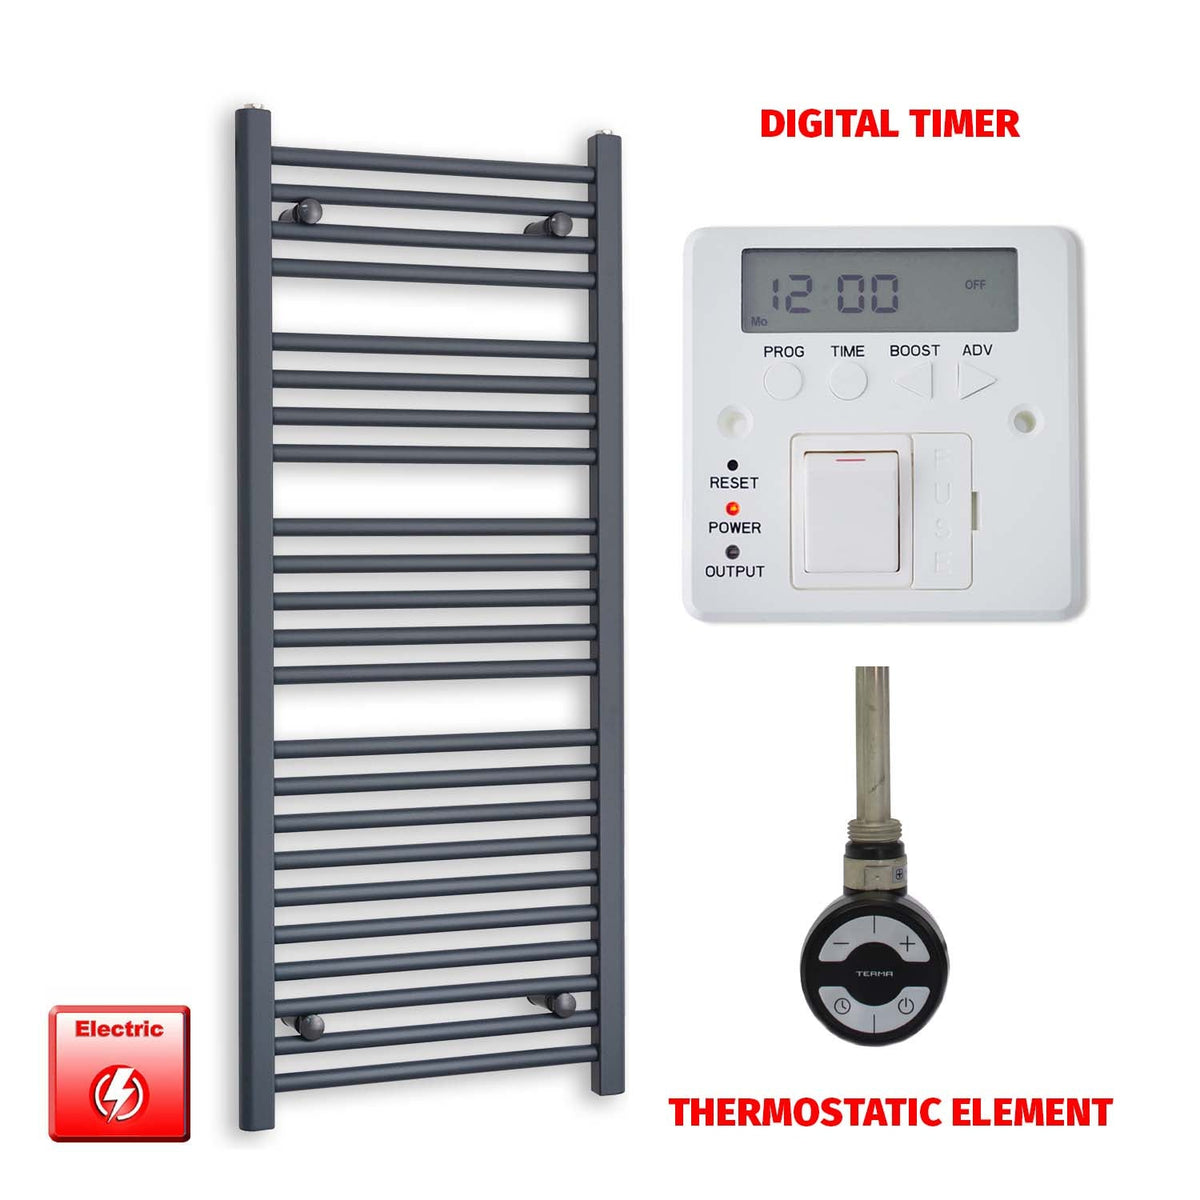 1200mm High 500mm Wide Flat Anthracite Pre-Filled Electric Heated Towel Rail Radiator HTR MOA Thermostatic element Digital timer